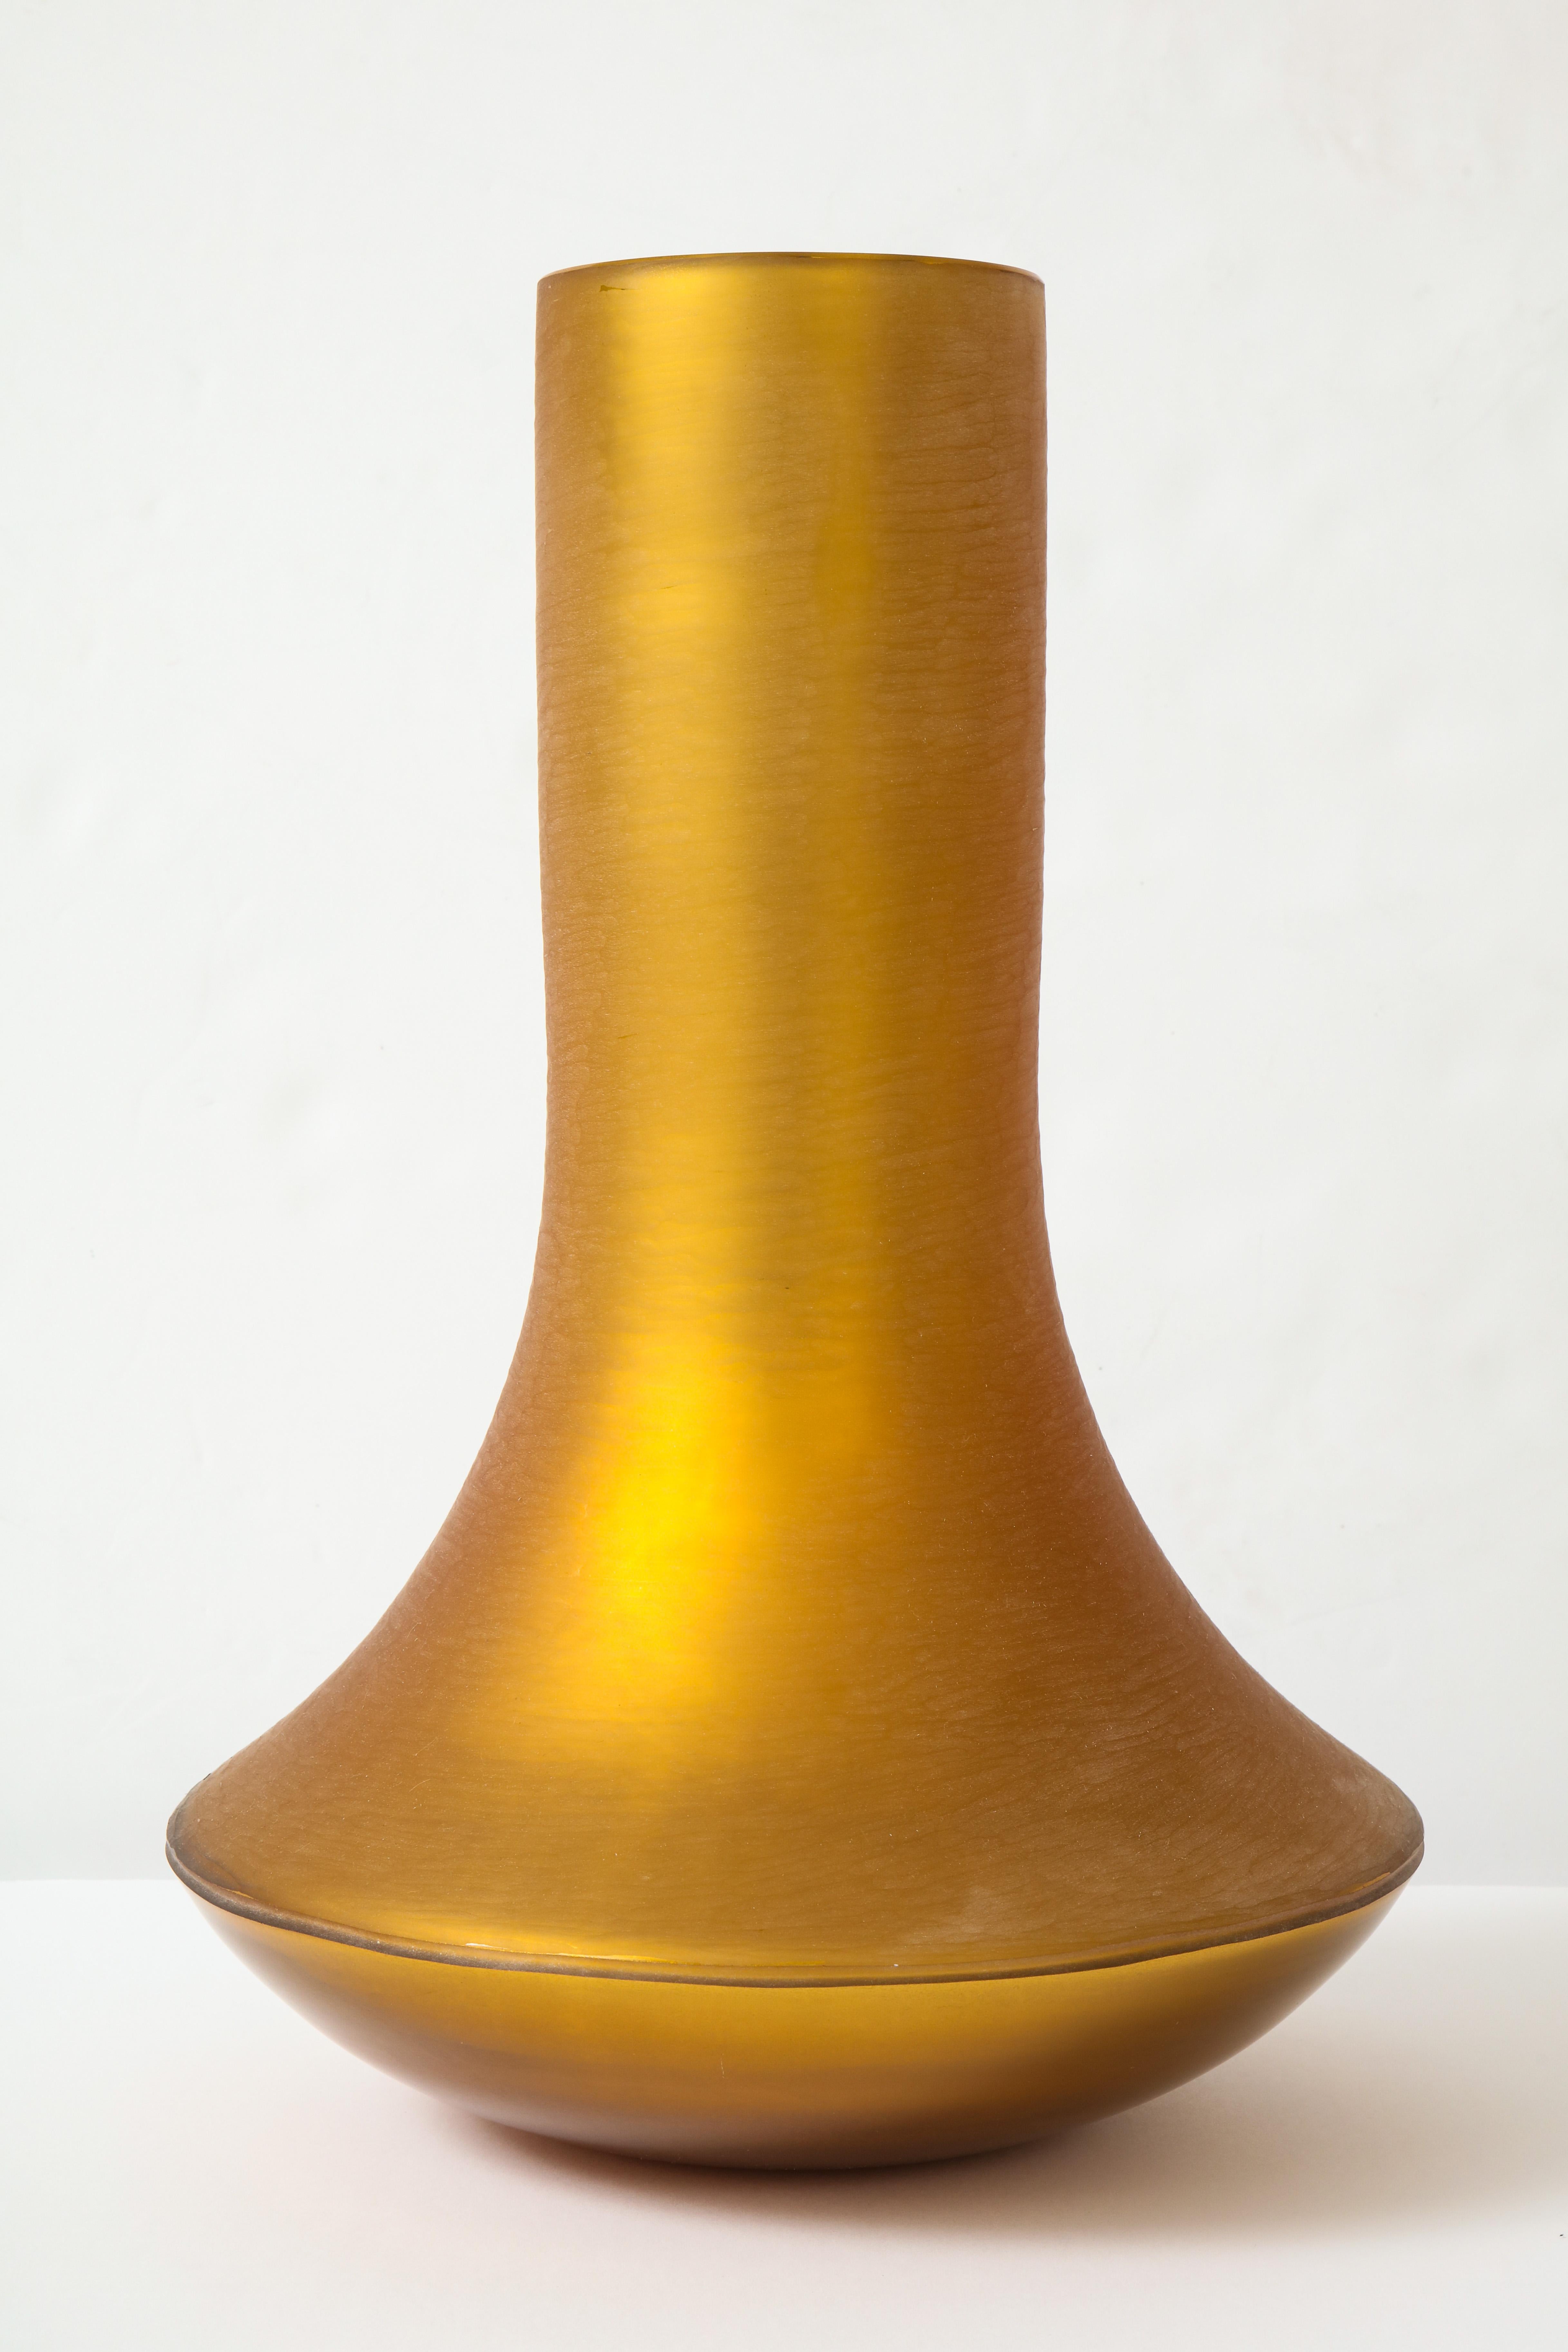 Large scale Murano glass bouquet vase with a matte gold color and chiseled frosted exterior. Etched on bottom.